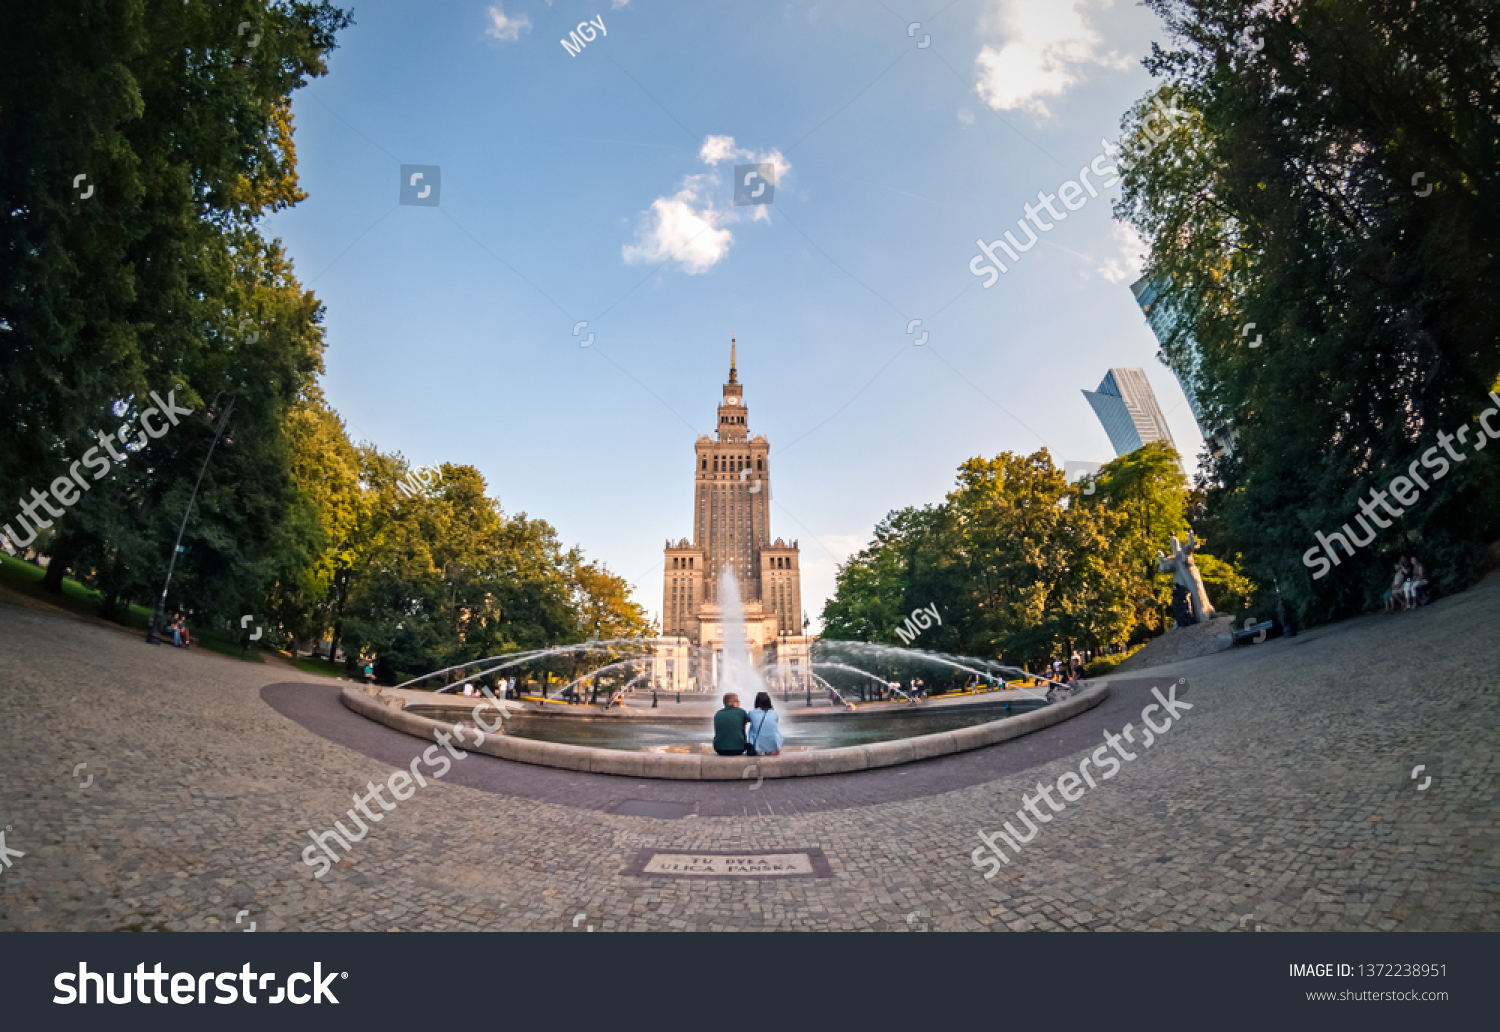 Warsaw, the capital of Poland #1372238951